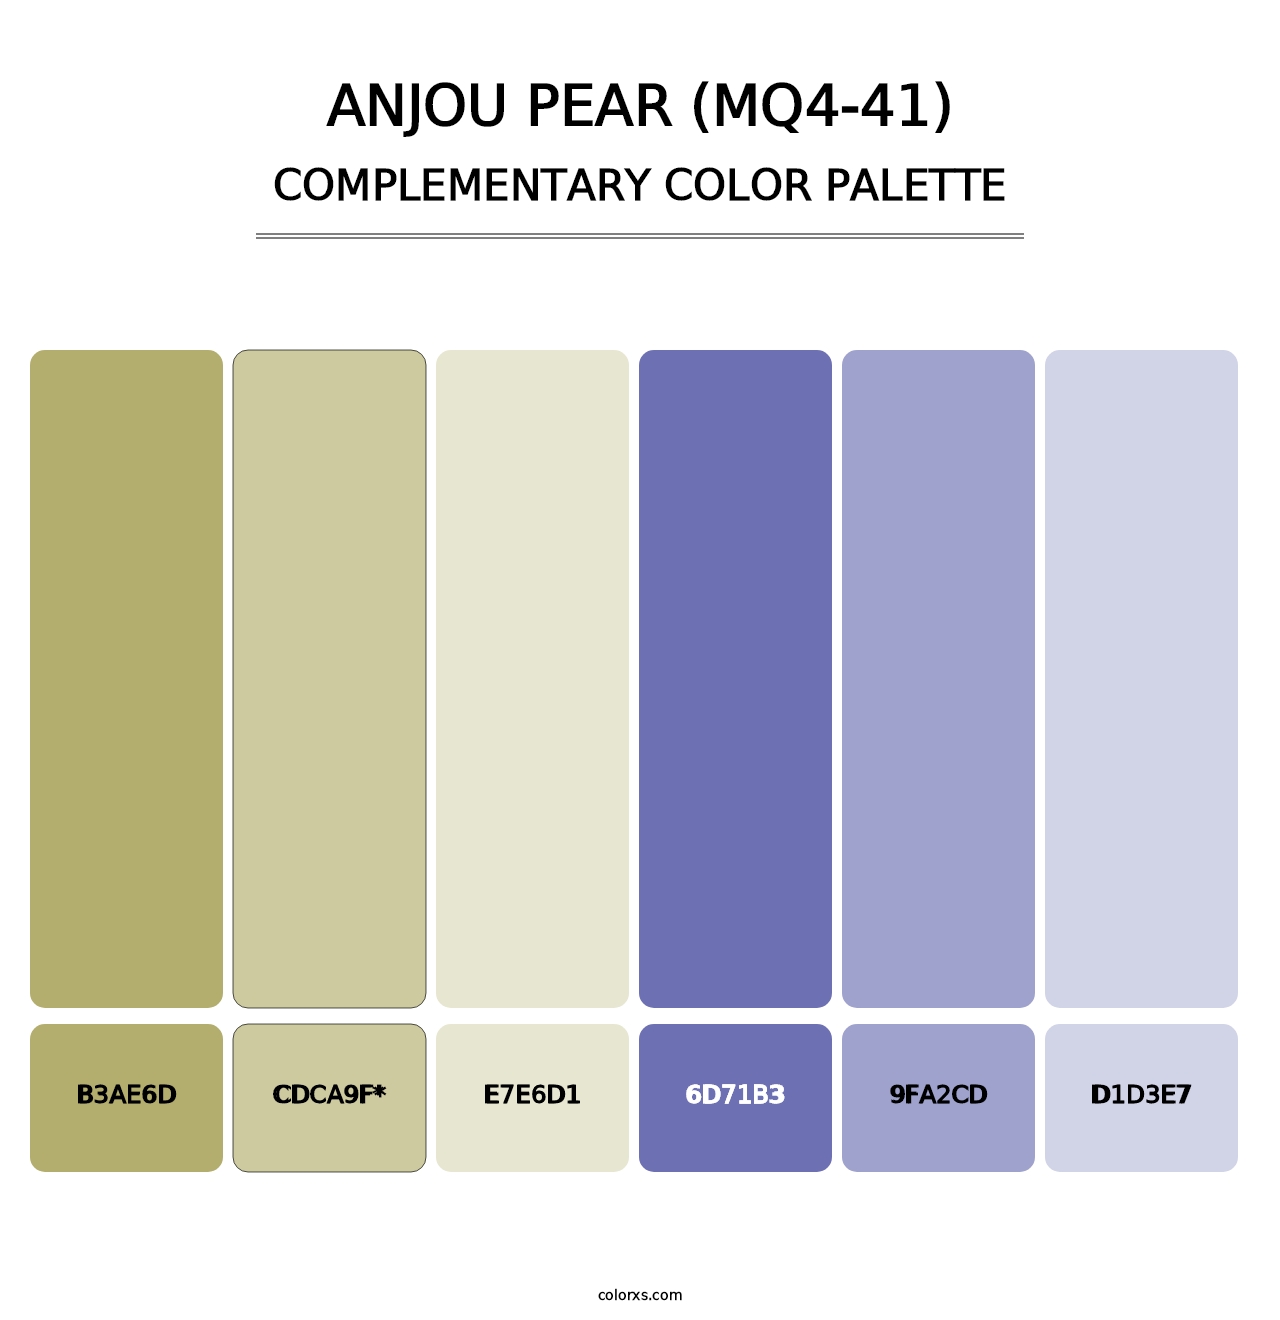 Anjou Pear (MQ4-41) - Complementary Color Palette